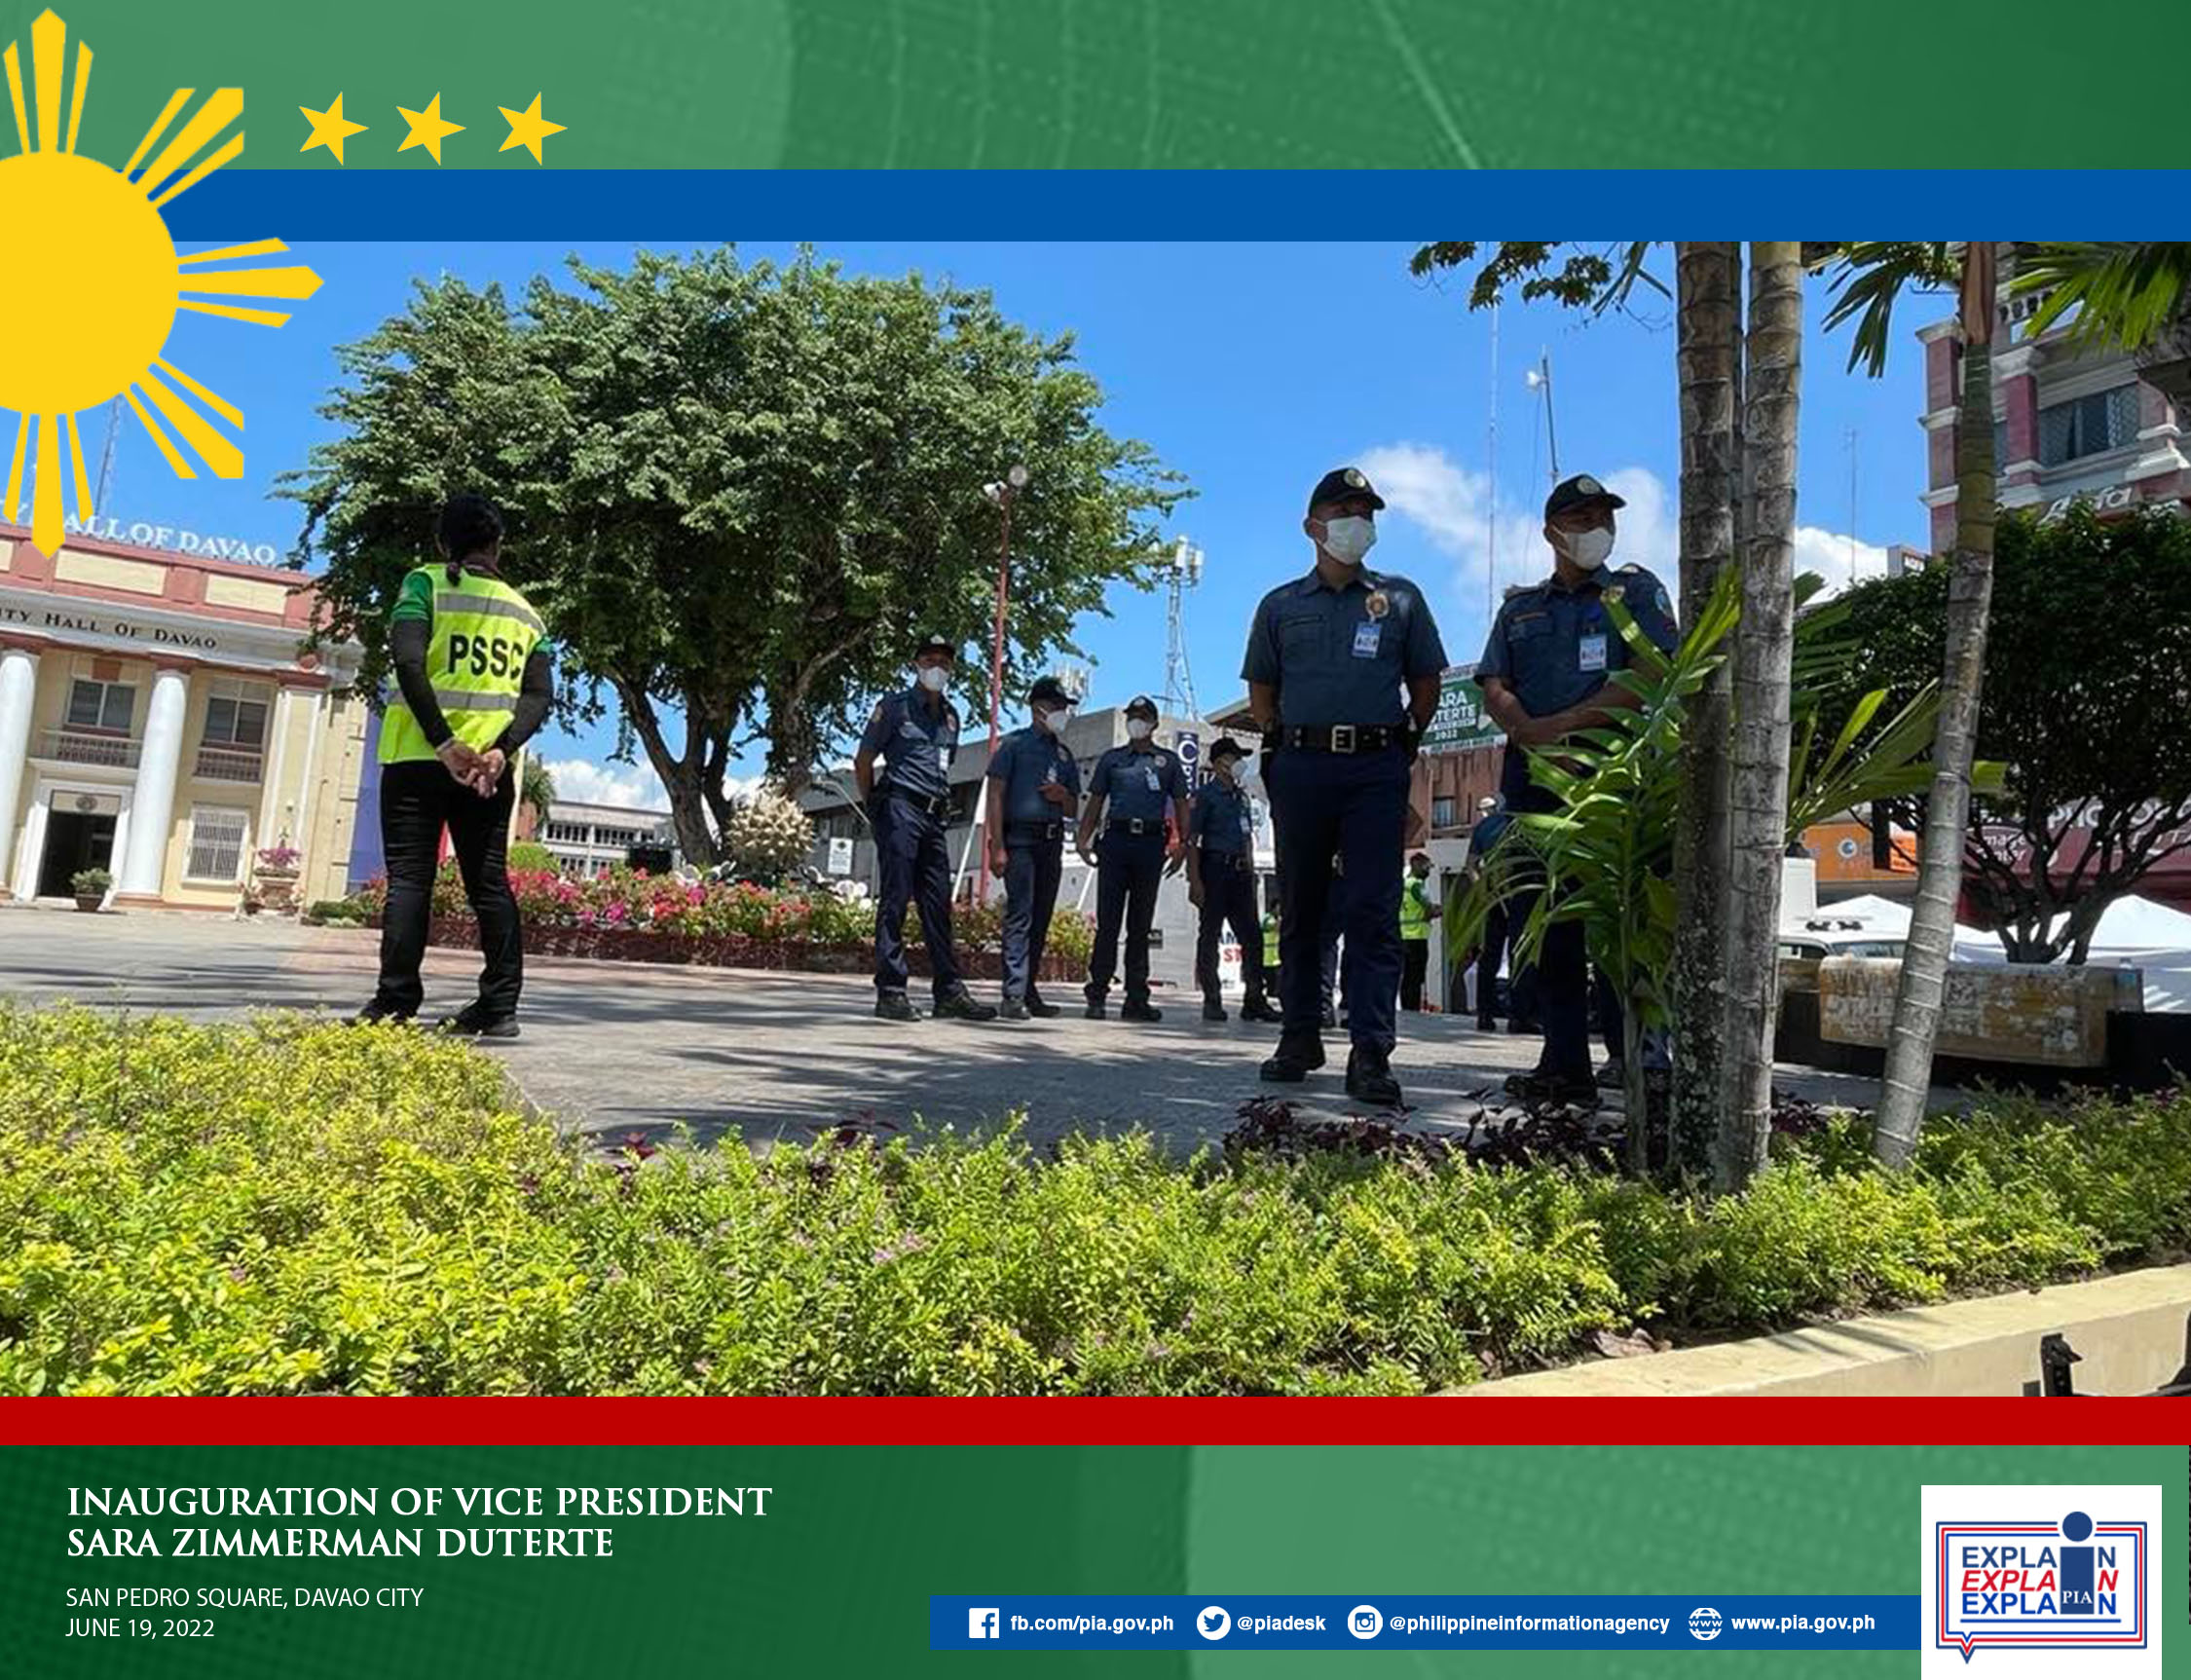 Security personnel keep watch over the preparations of the inauguration of Vice-President elect Sara Duterte